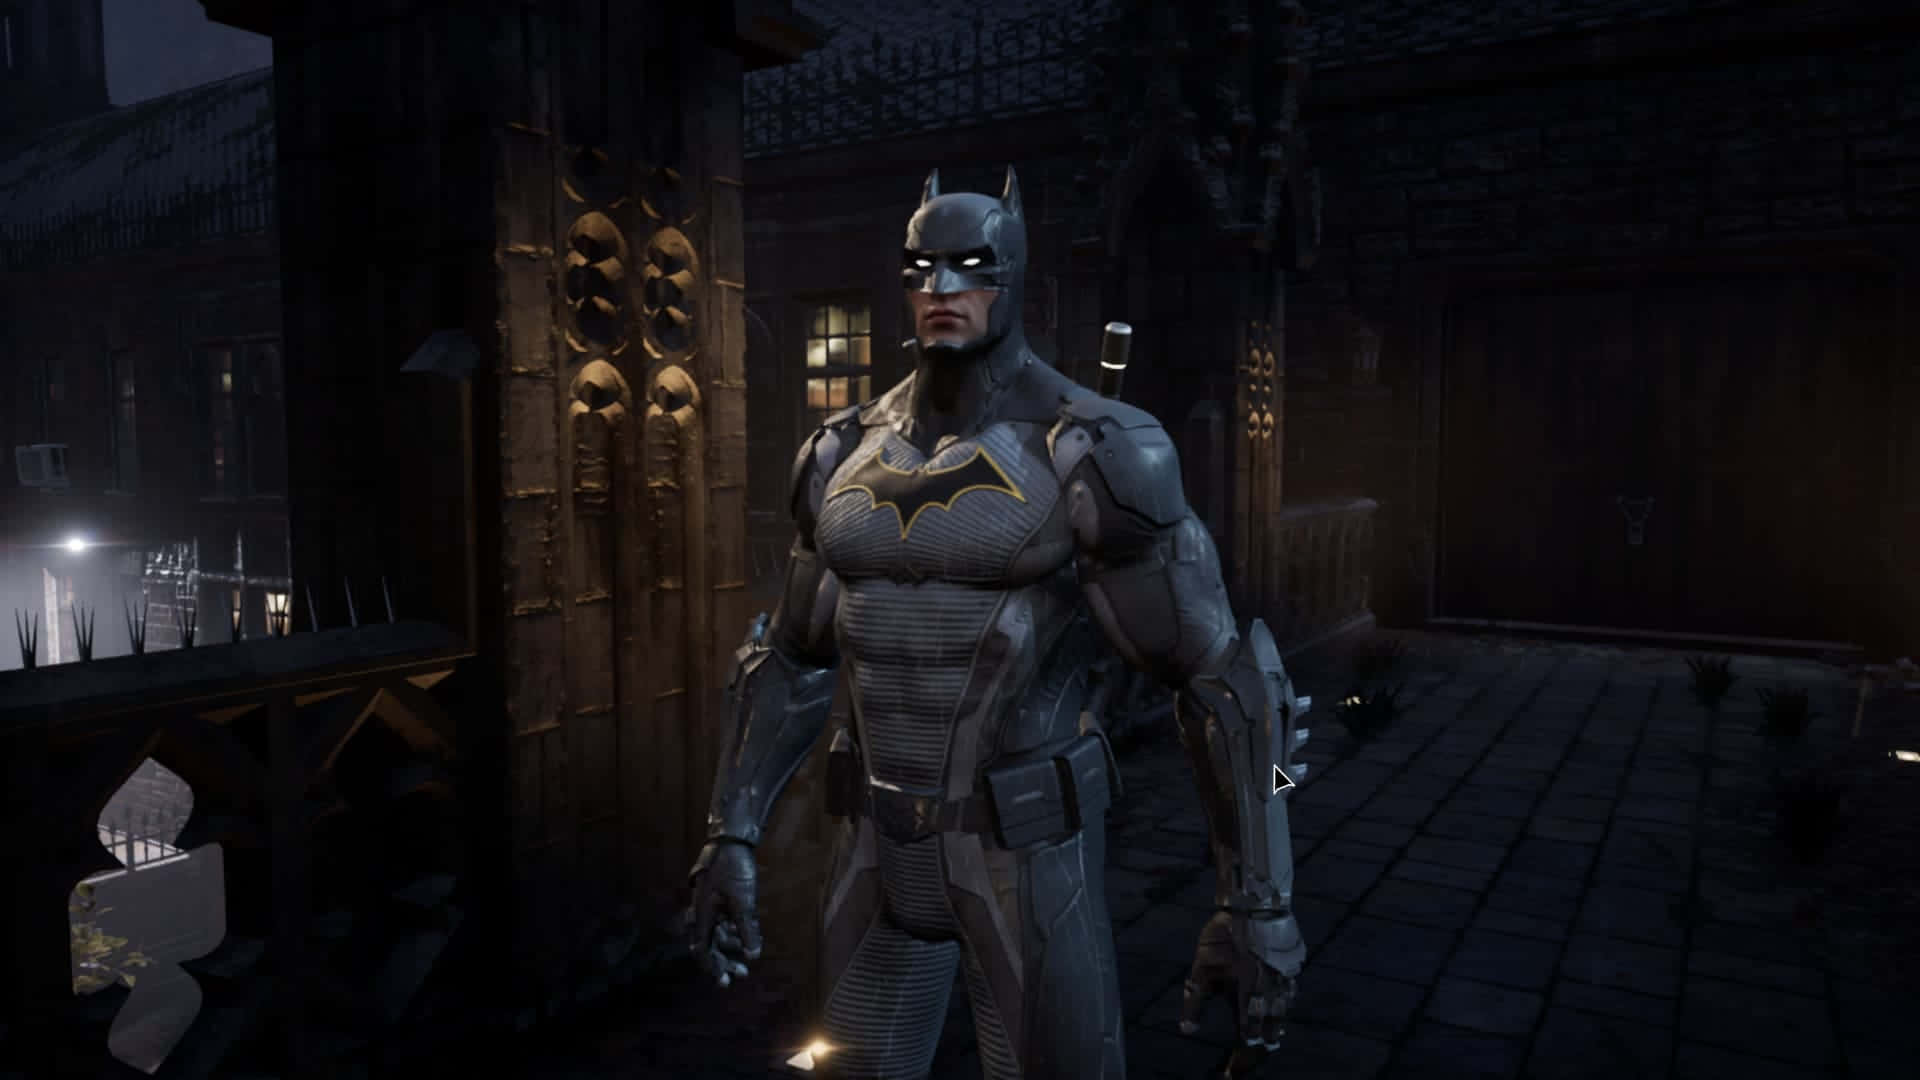 Daring and Powerful Bat-suit Displayed in Action Wallpaper